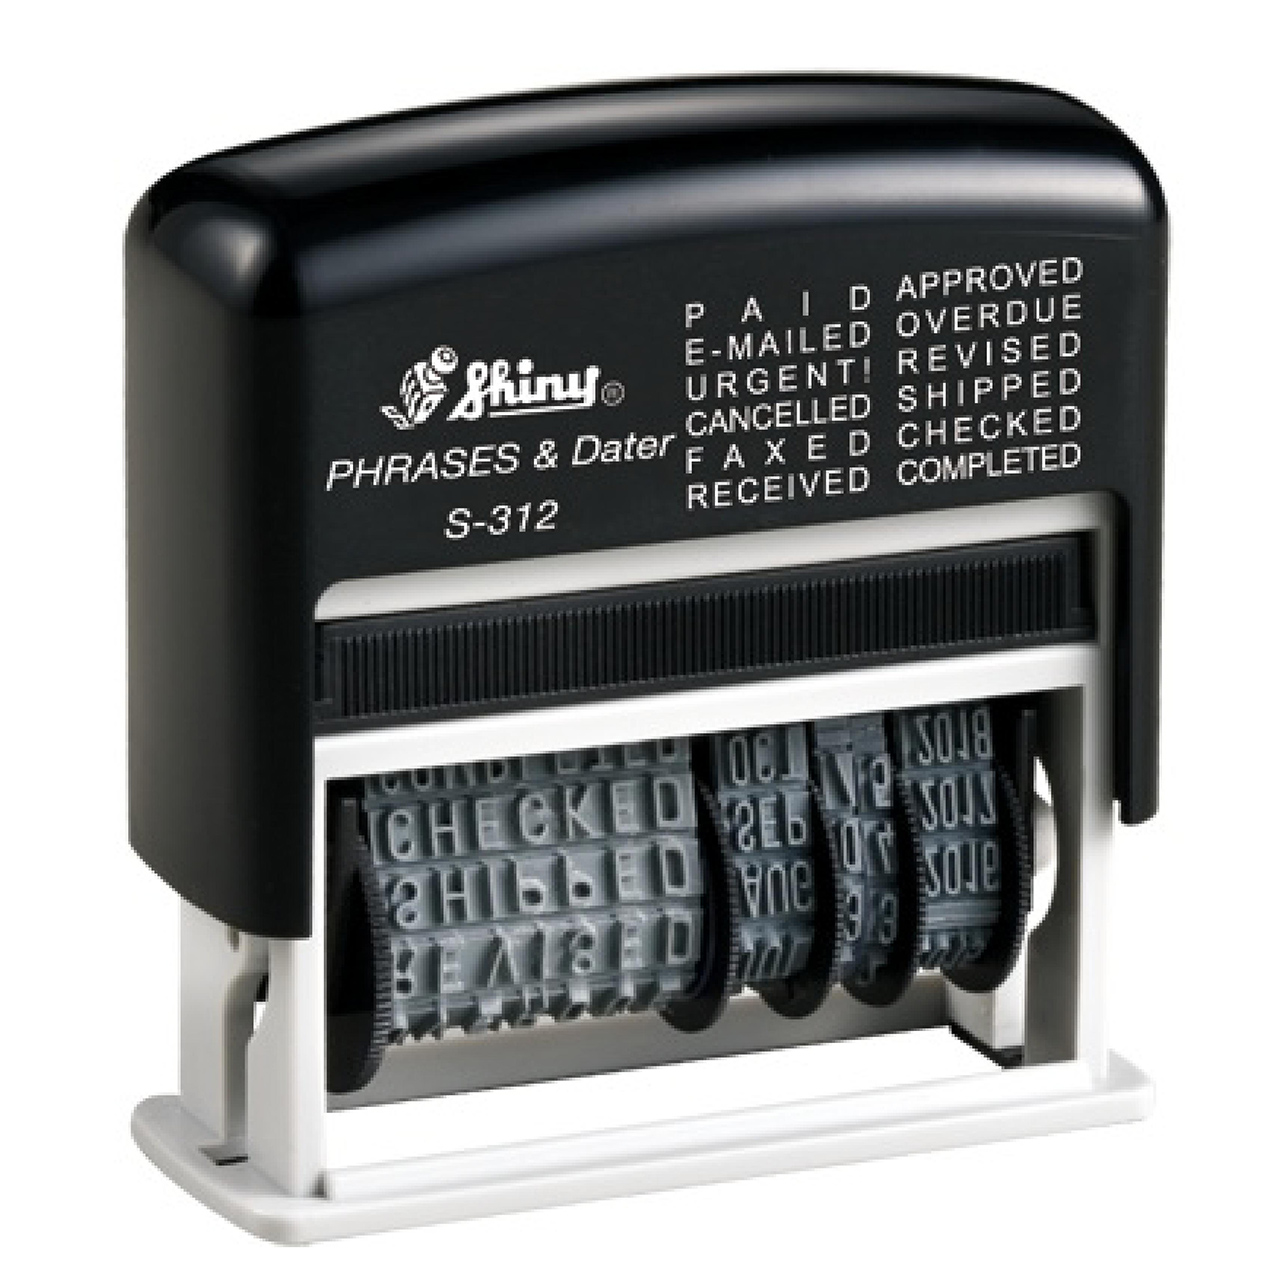 Self-Inking Date Stamp with Status Messages